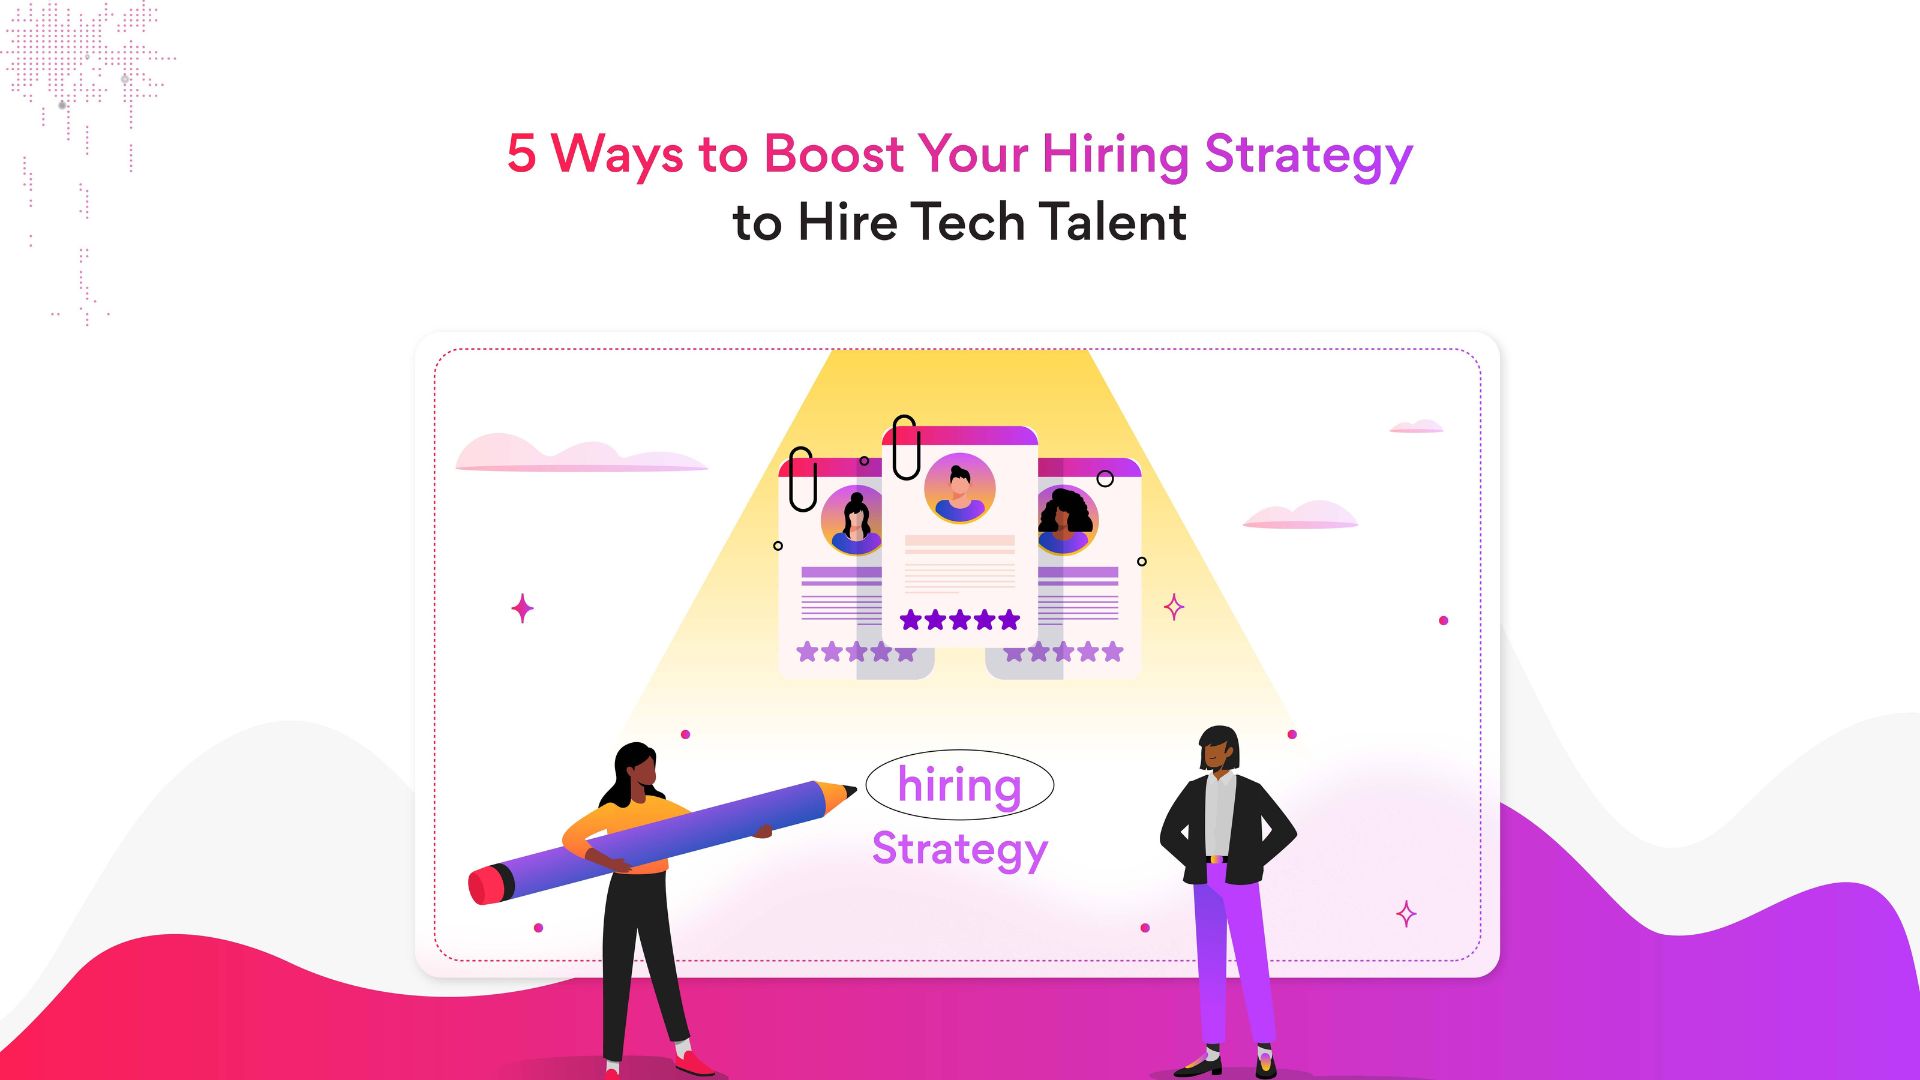 5 Ways to Boost Your Hiring Strategy to Hire Tech Talent